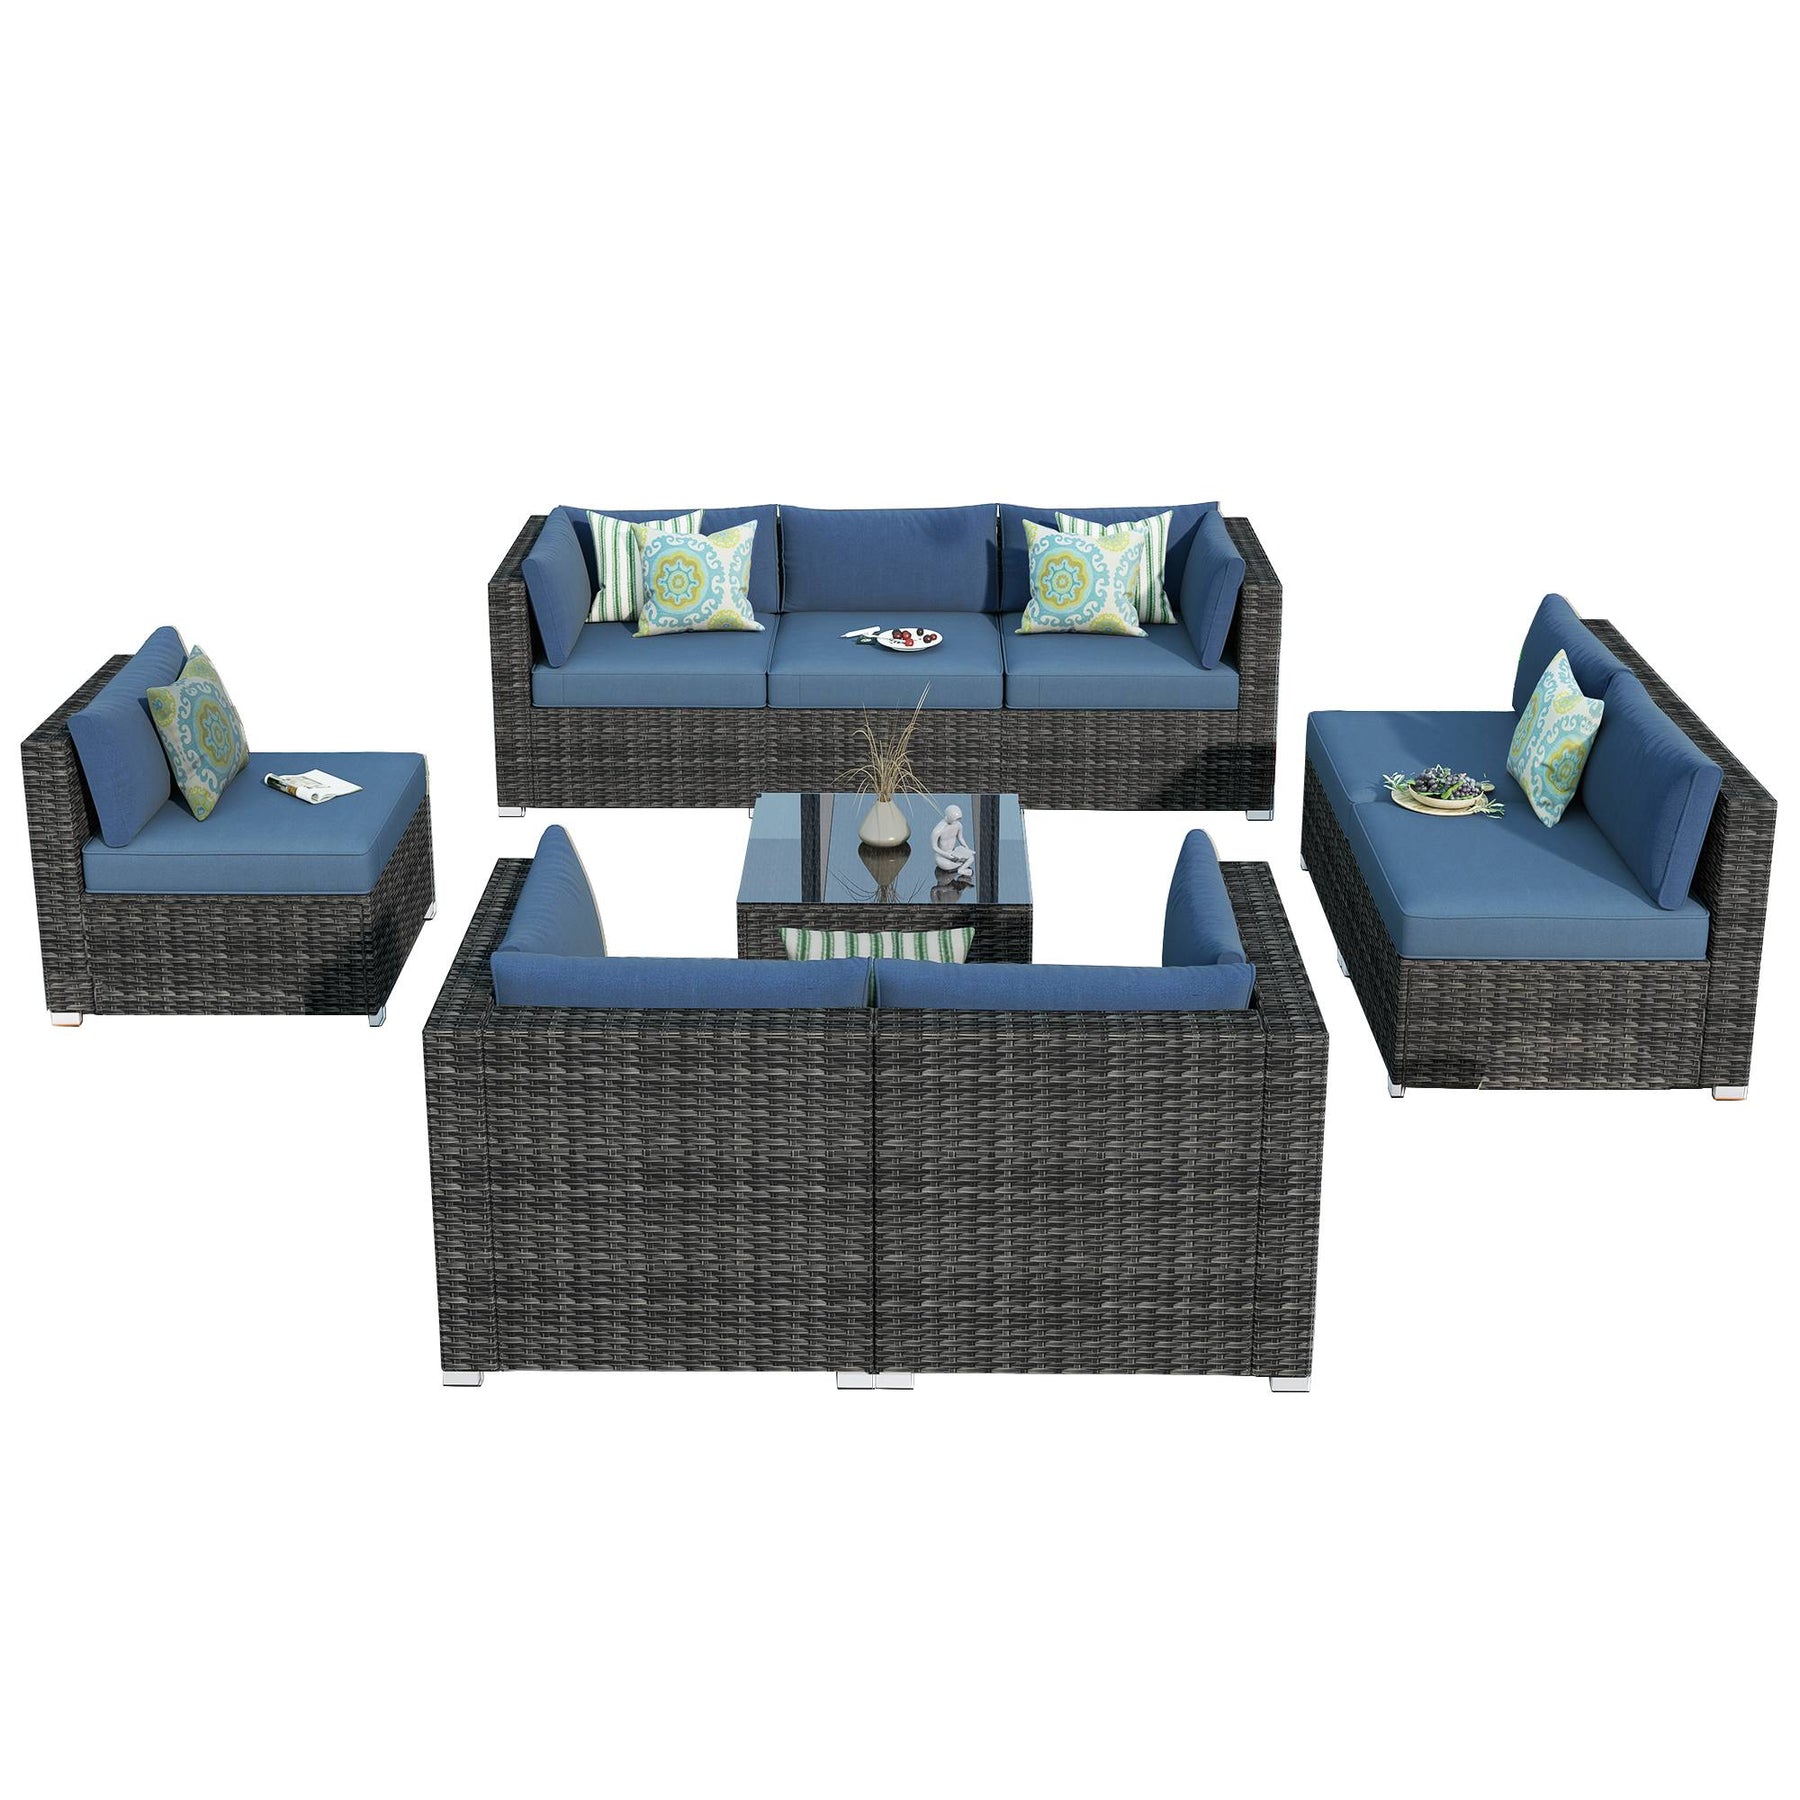 Ovios Outdoor Sectional Furniture 9-Piece with Cushions and Table